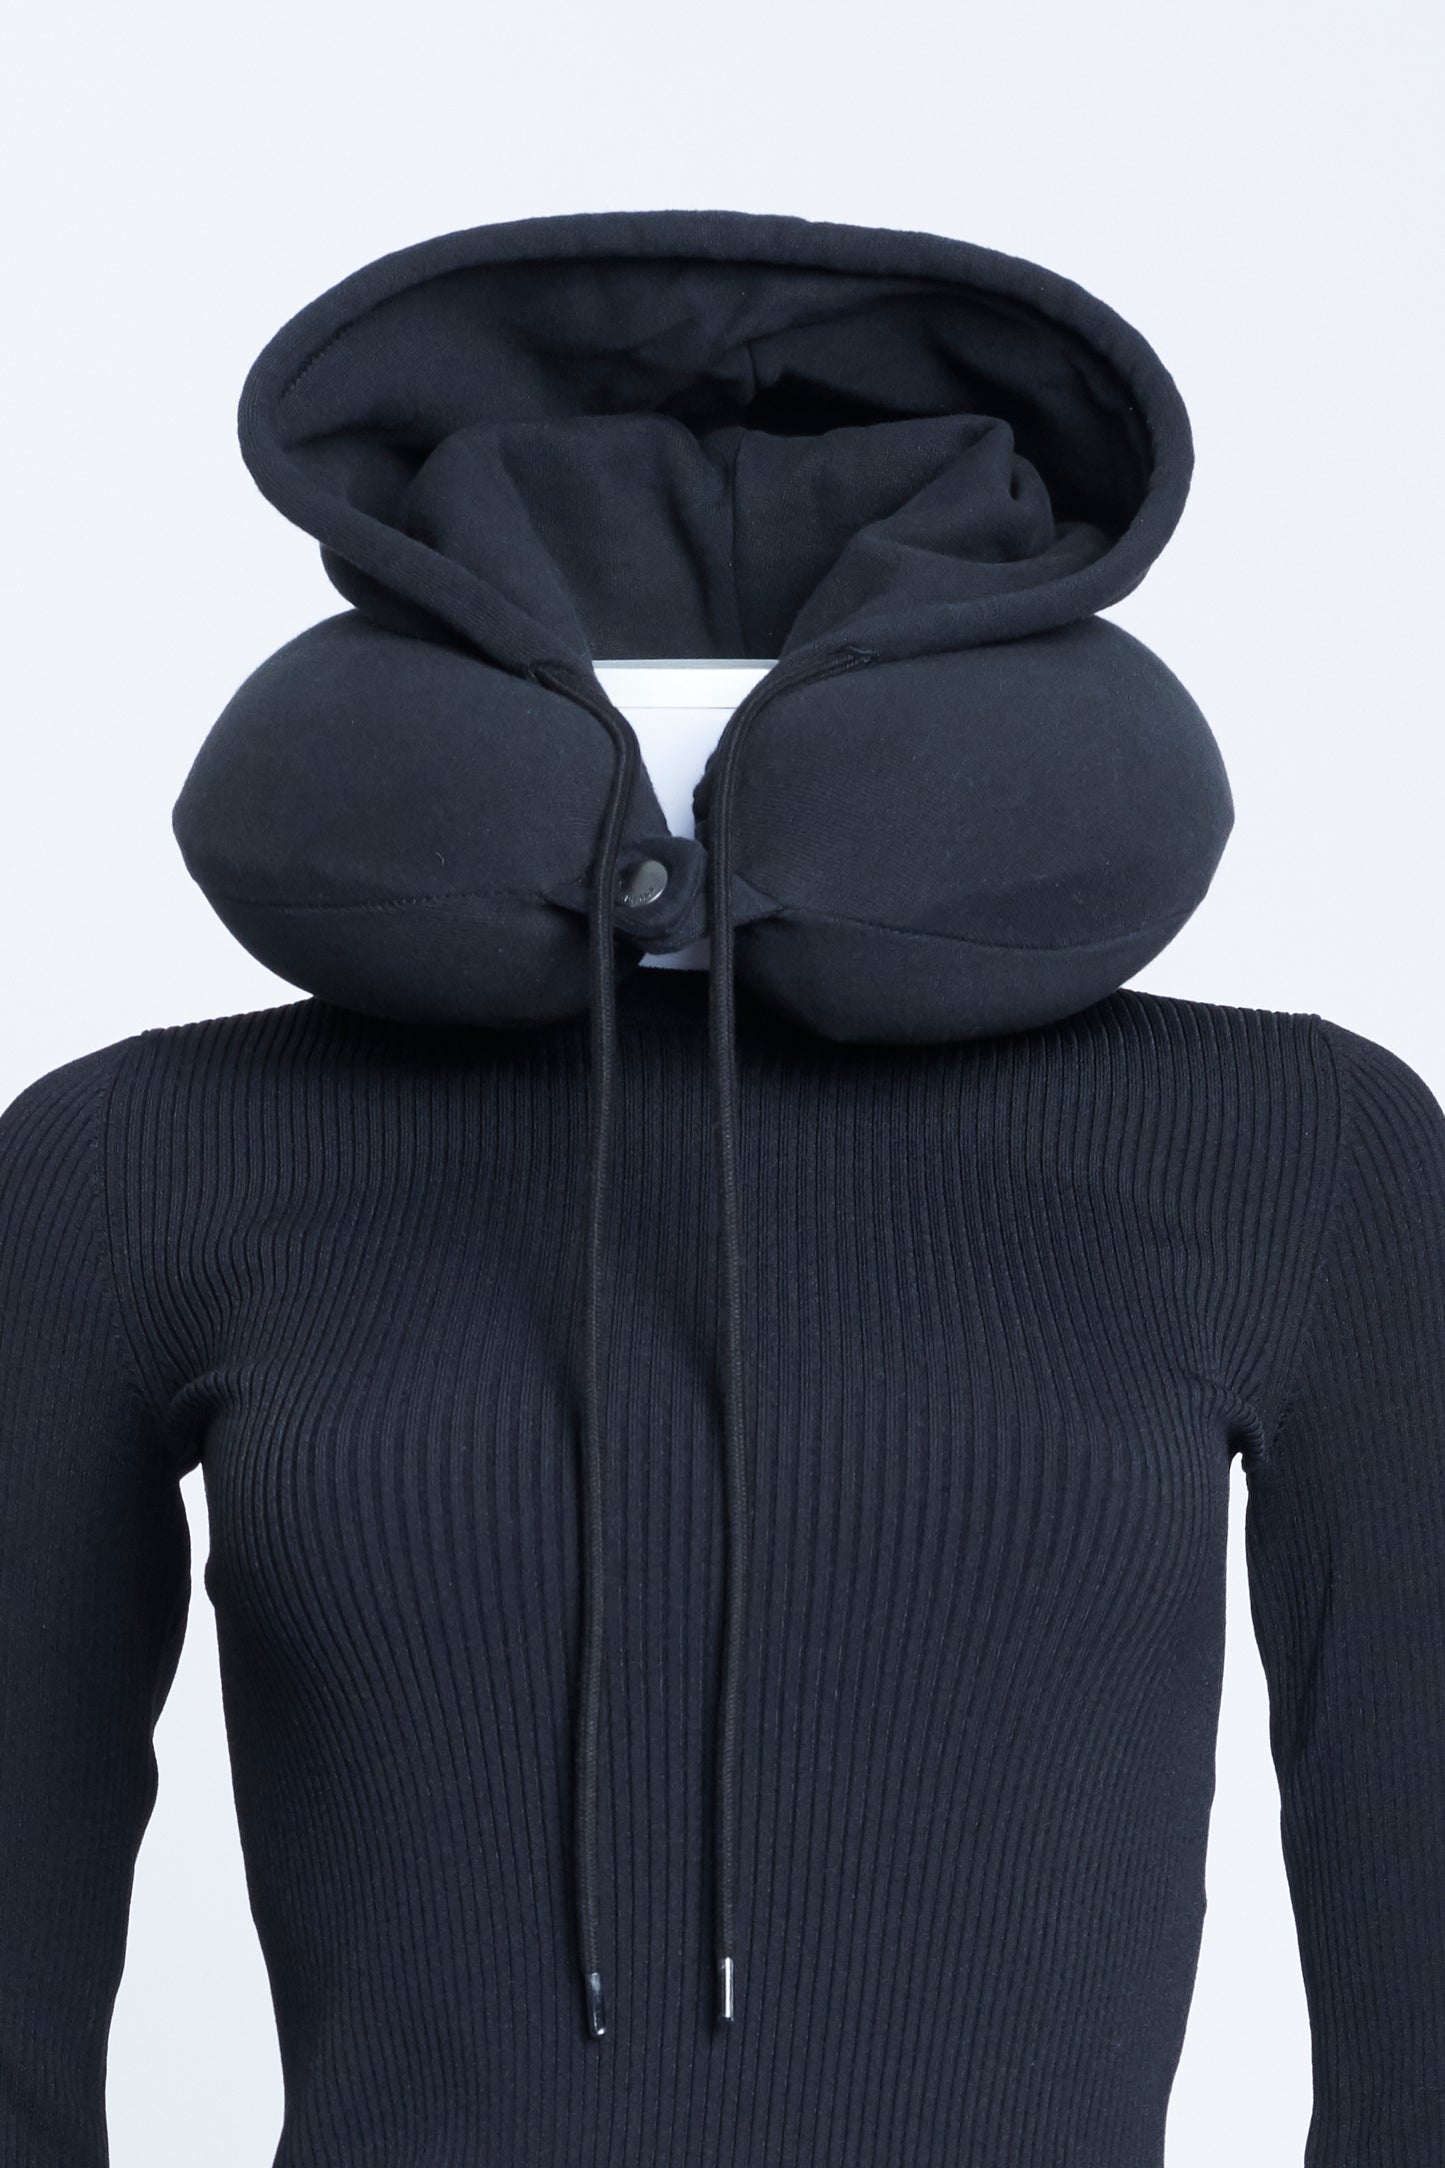 Black Fleece Lined Travel Pillow With Hood